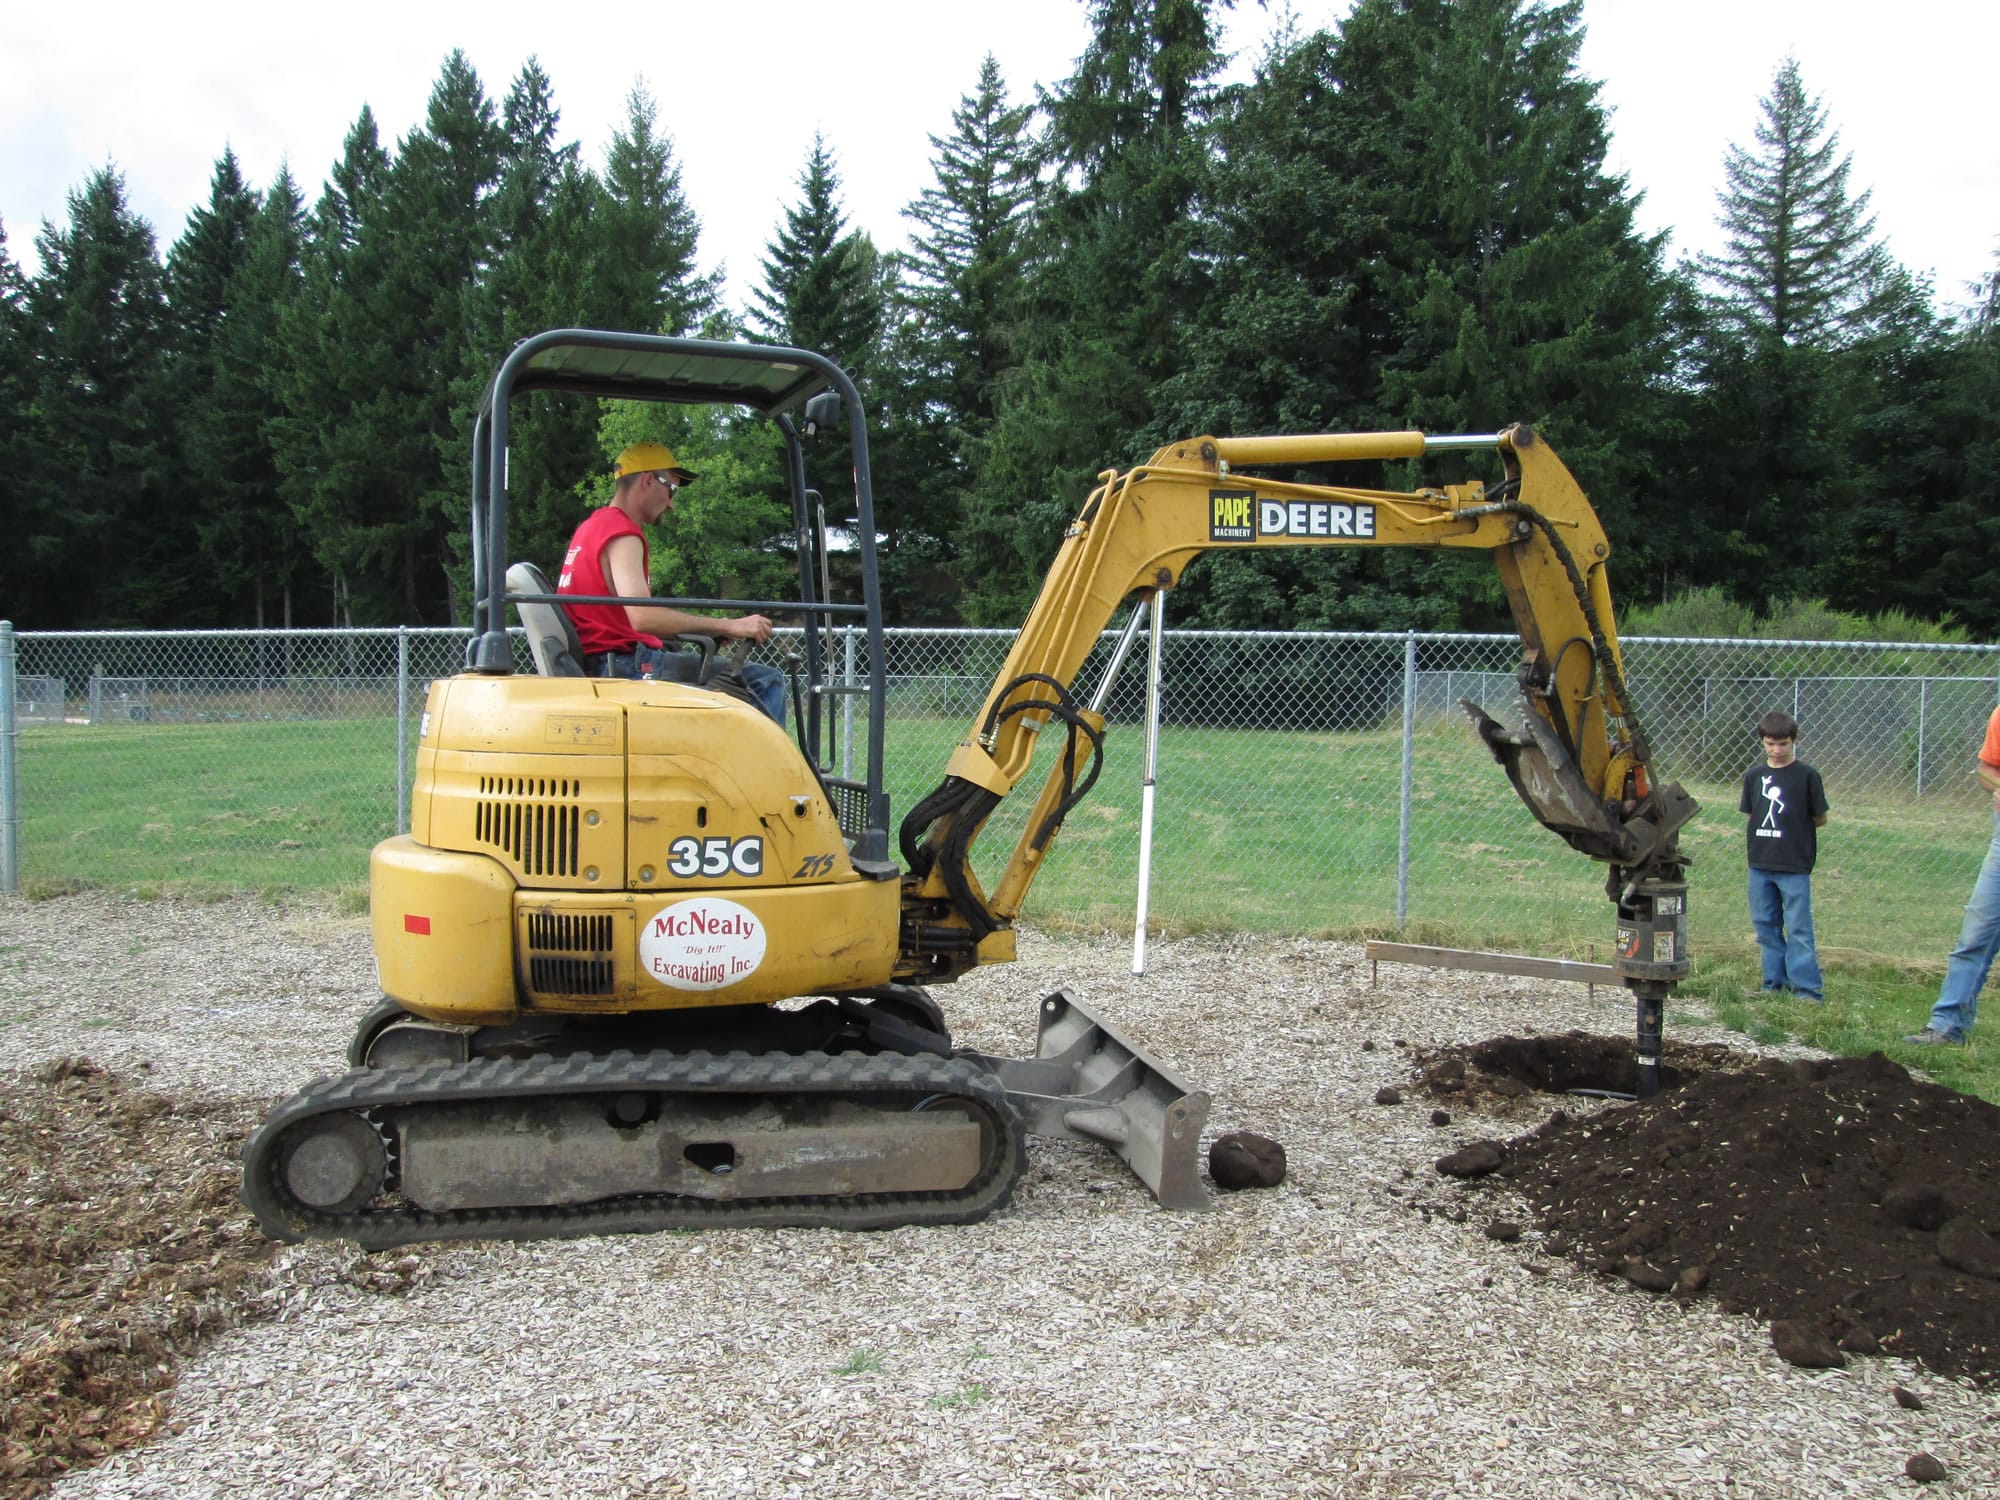 Photo courtesy of Tammy Connolly
Thanks to the efforts of the Cape Horn-Skye Elementary School Booster Club and contributions from the community, students at the rural Washougal school will have a covered play area starting this fall.